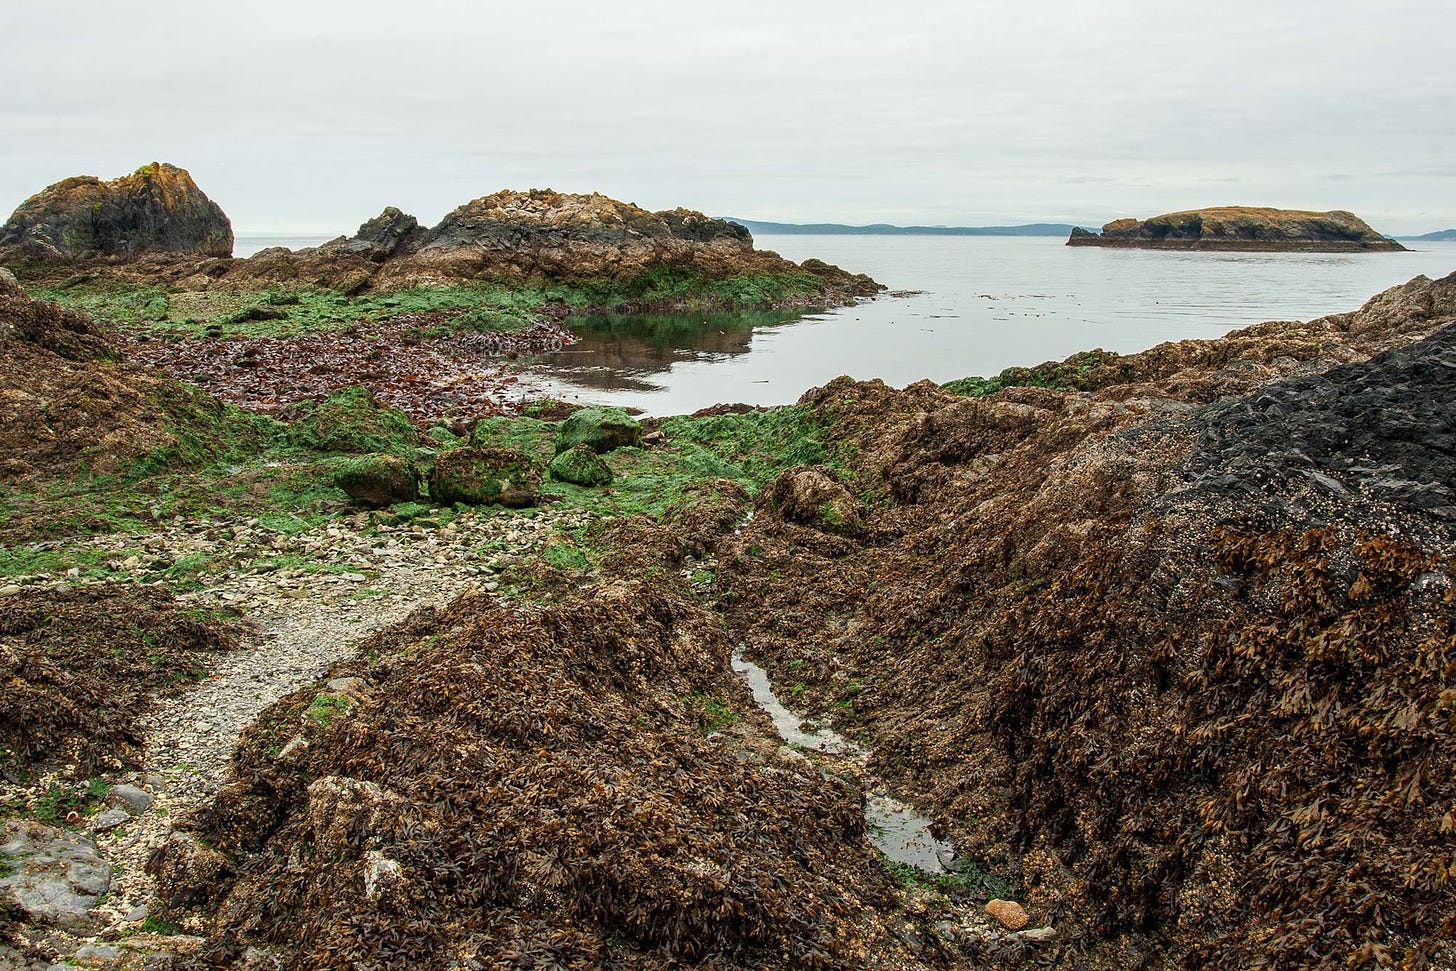 Seashore rocks and path with open water and a small island beyond. Stripes color the landscape green with seaweed at the lowest points, then brown-yellow with another variety of seaweed, then black stone and finally yellowish blotched with white above the waterline.